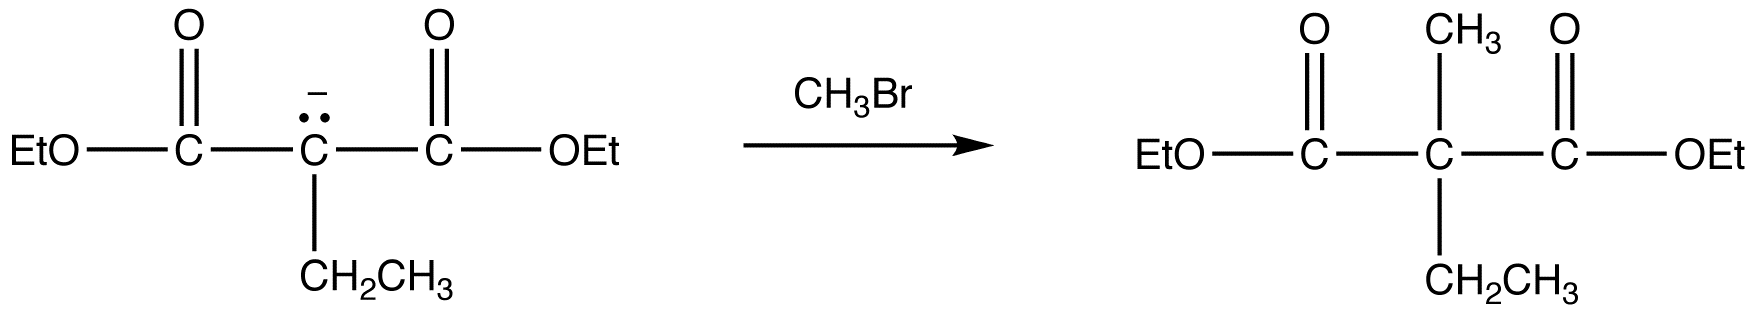 malonicestersynthesis15.png